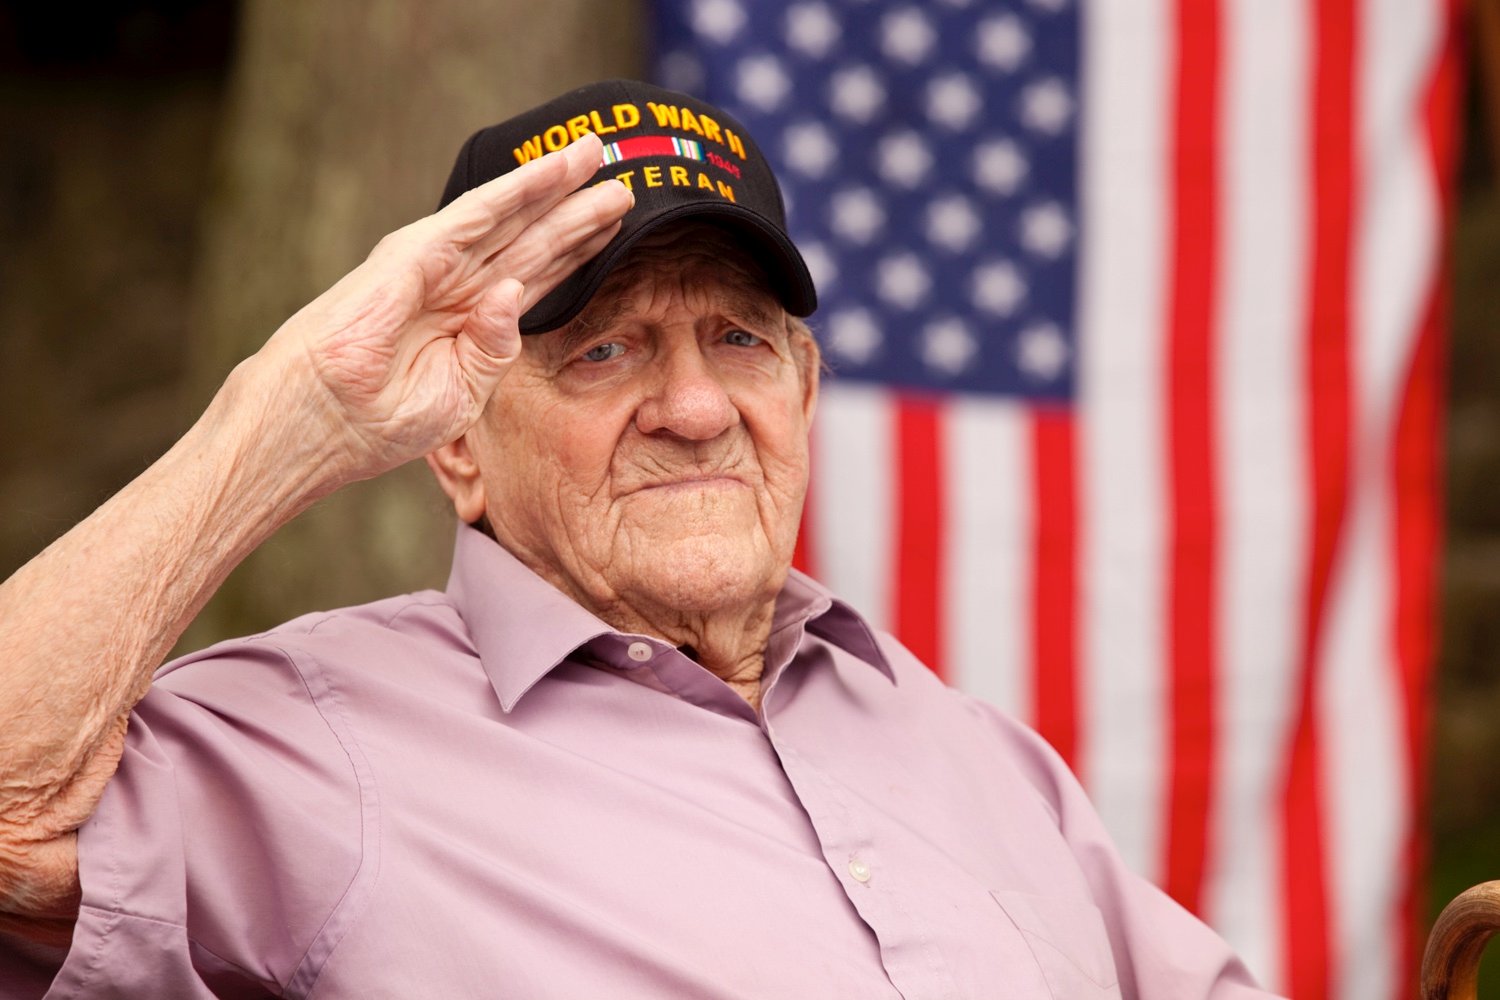 Senior veteran giving a salute in front of an American flag